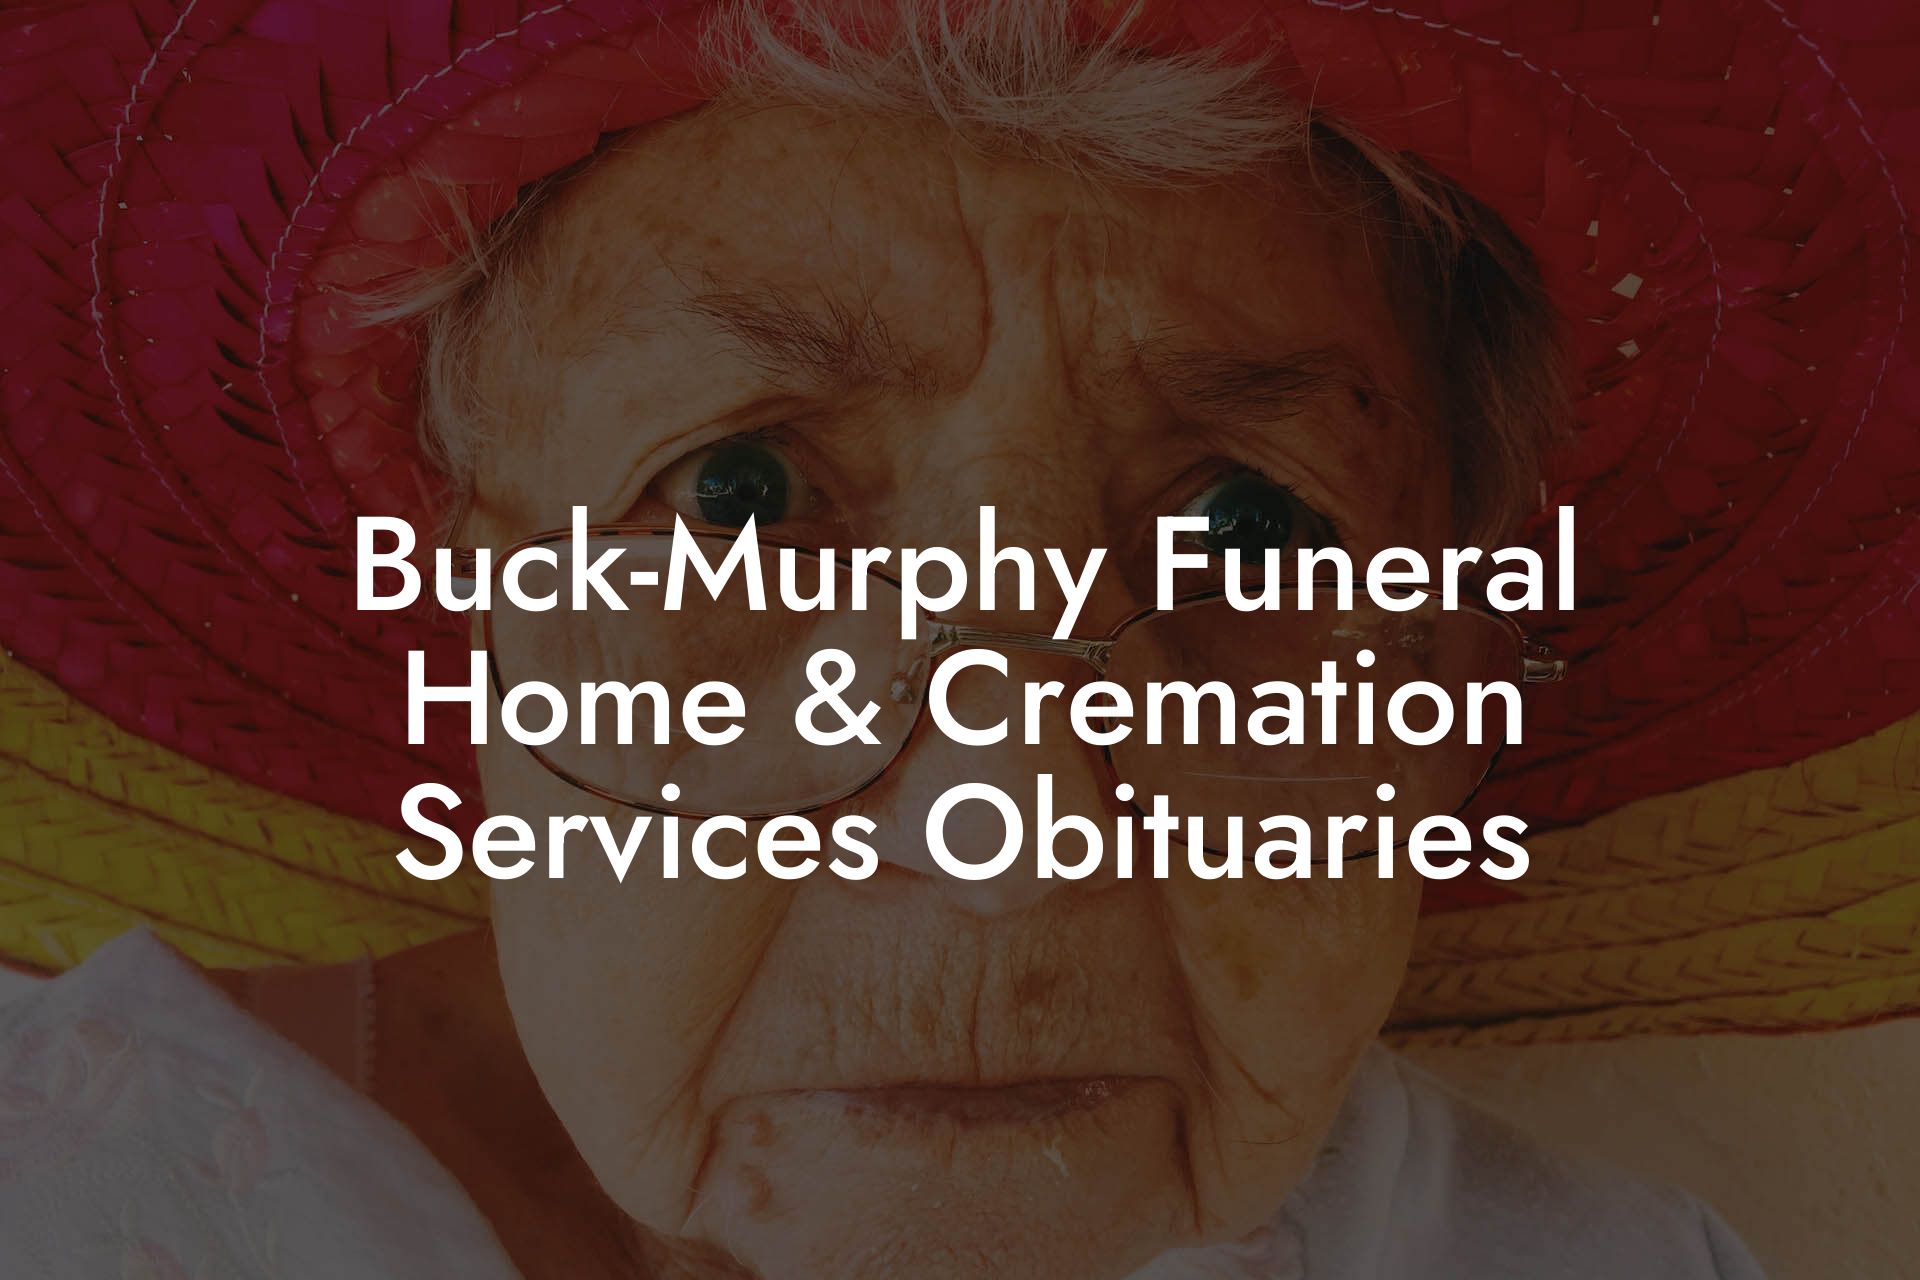 Buck-Murphy Funeral Home & Cremation Services Obituaries